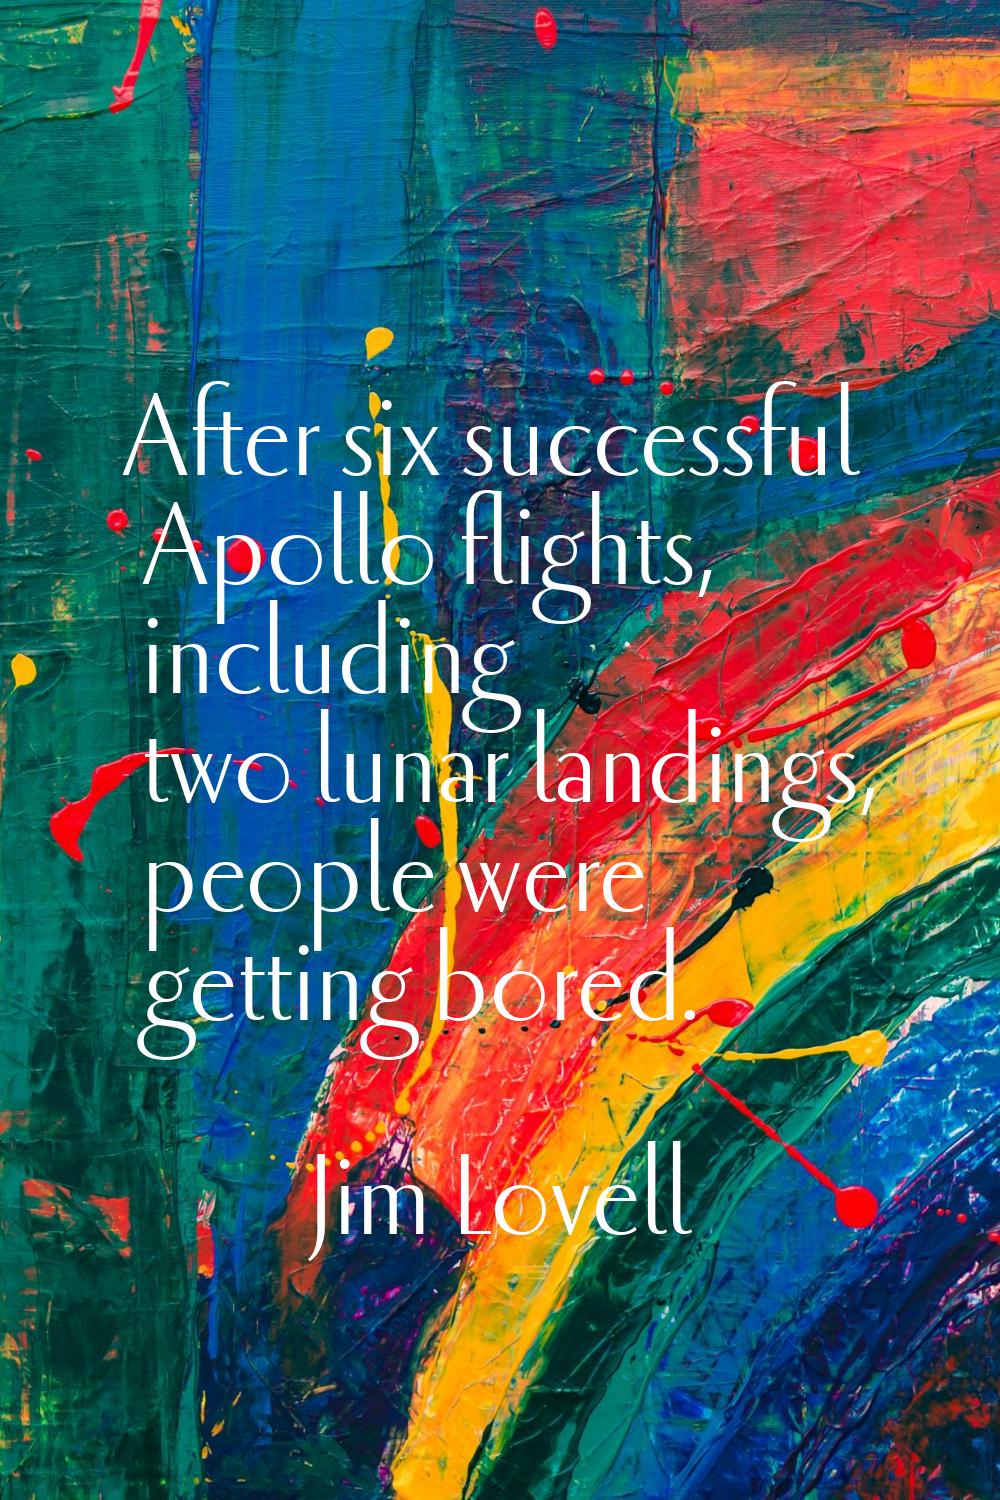 After six successful Apollo flights, including two lunar landings, people were getting bored.